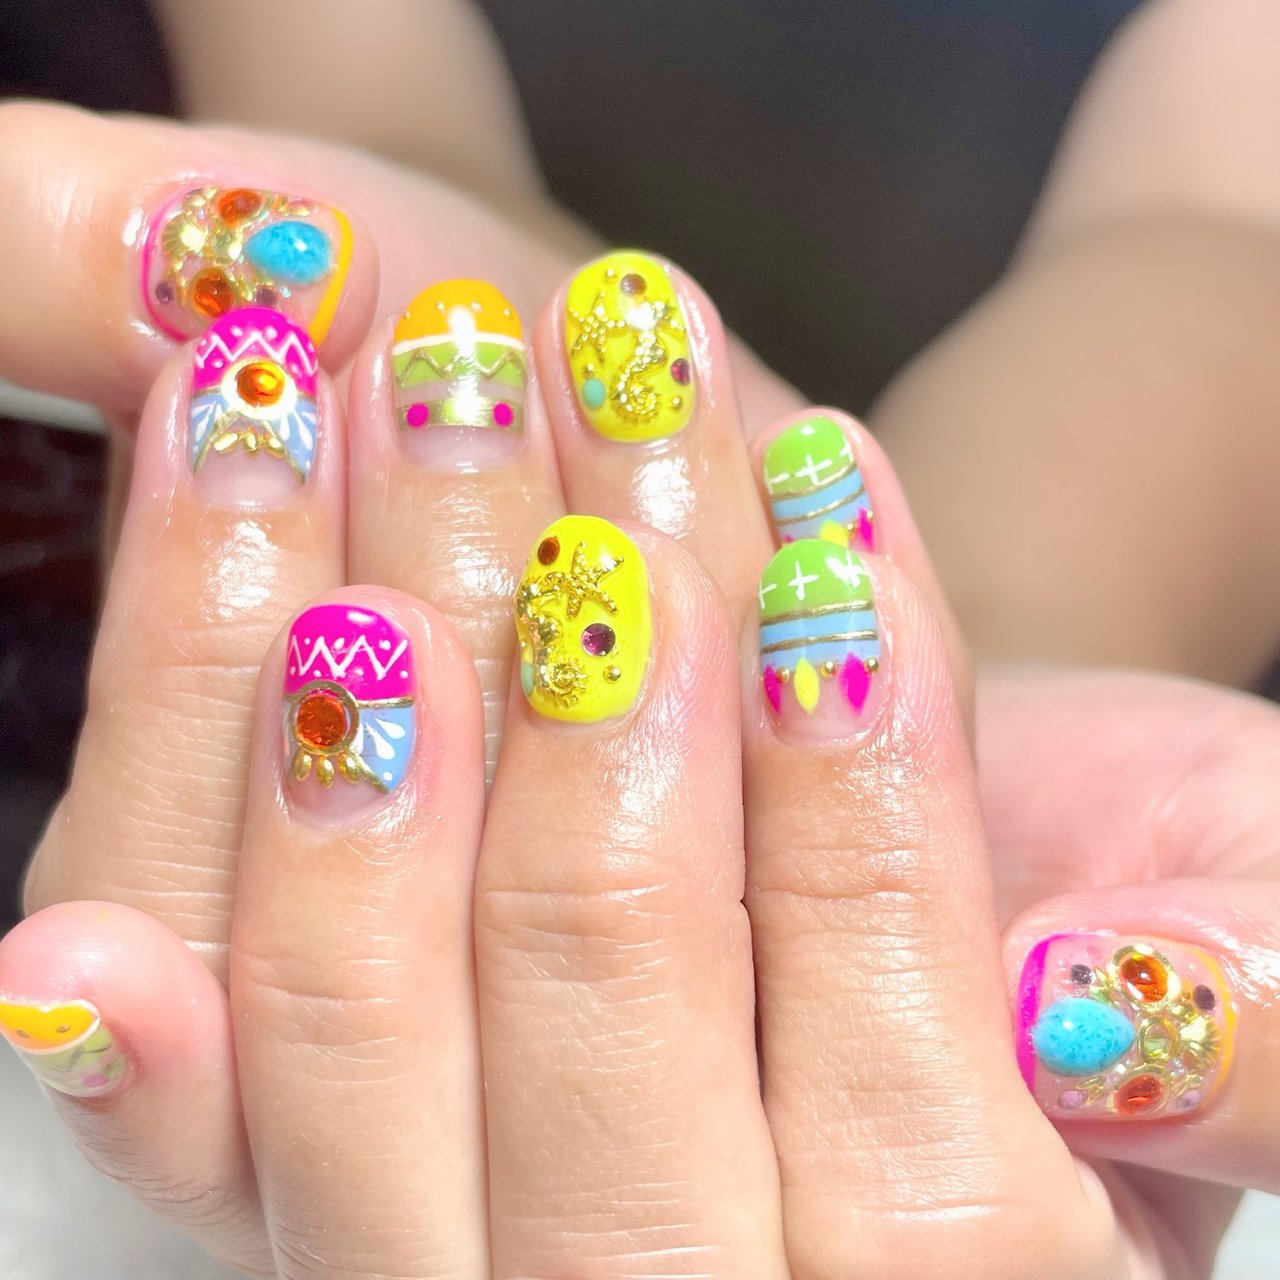 Only Nail 西船橋南口徒歩6分 のネイルデザイン No ネイルブック